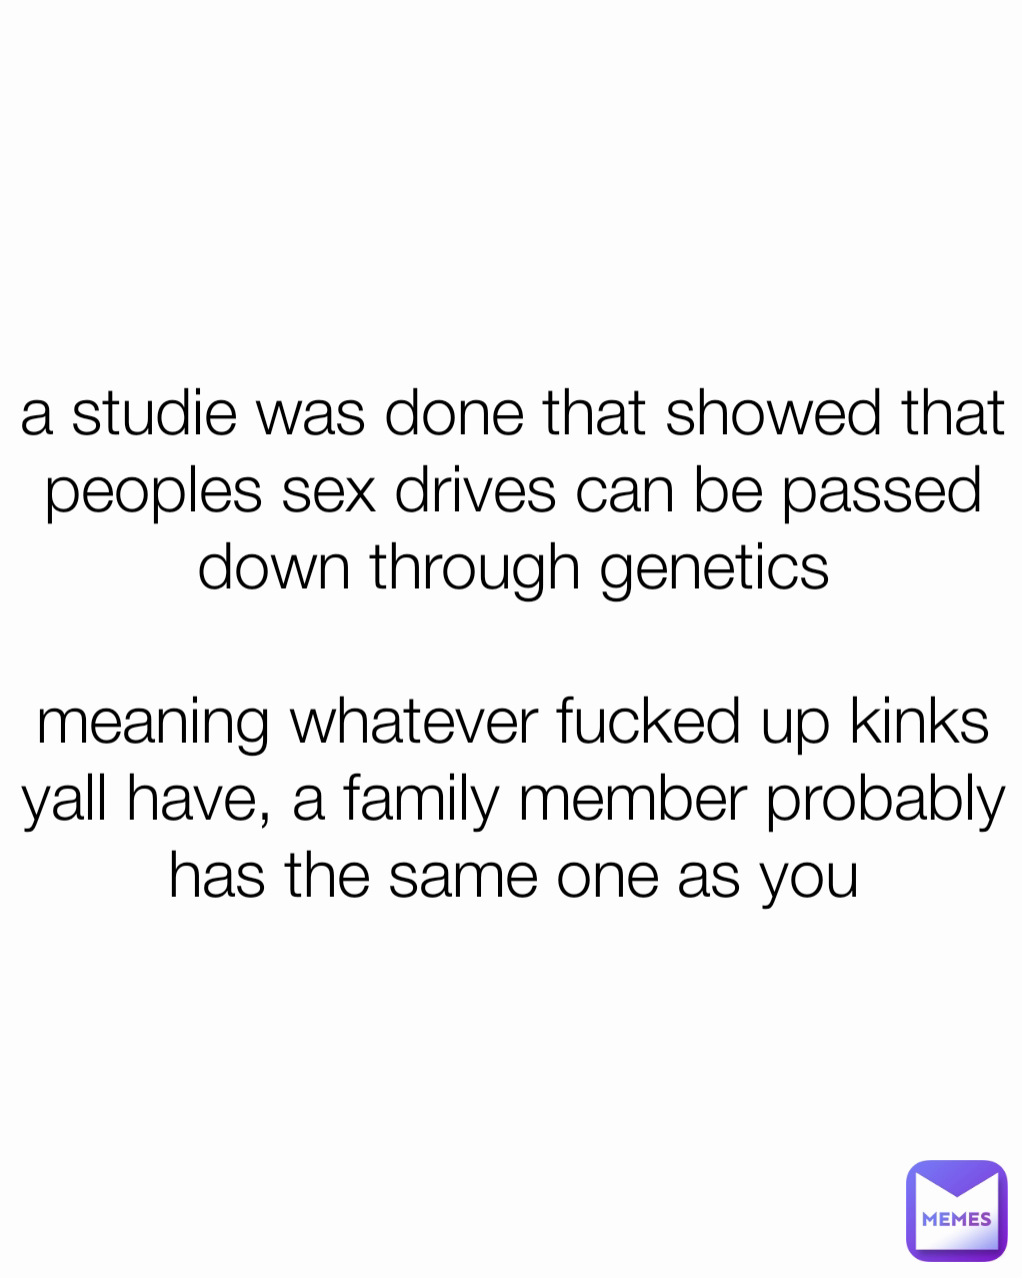 a studie was done that showed that peoples sex drives can be passed down through genetics

meaning whatever fucked up kinks yall have, a family member probably has the same one as you